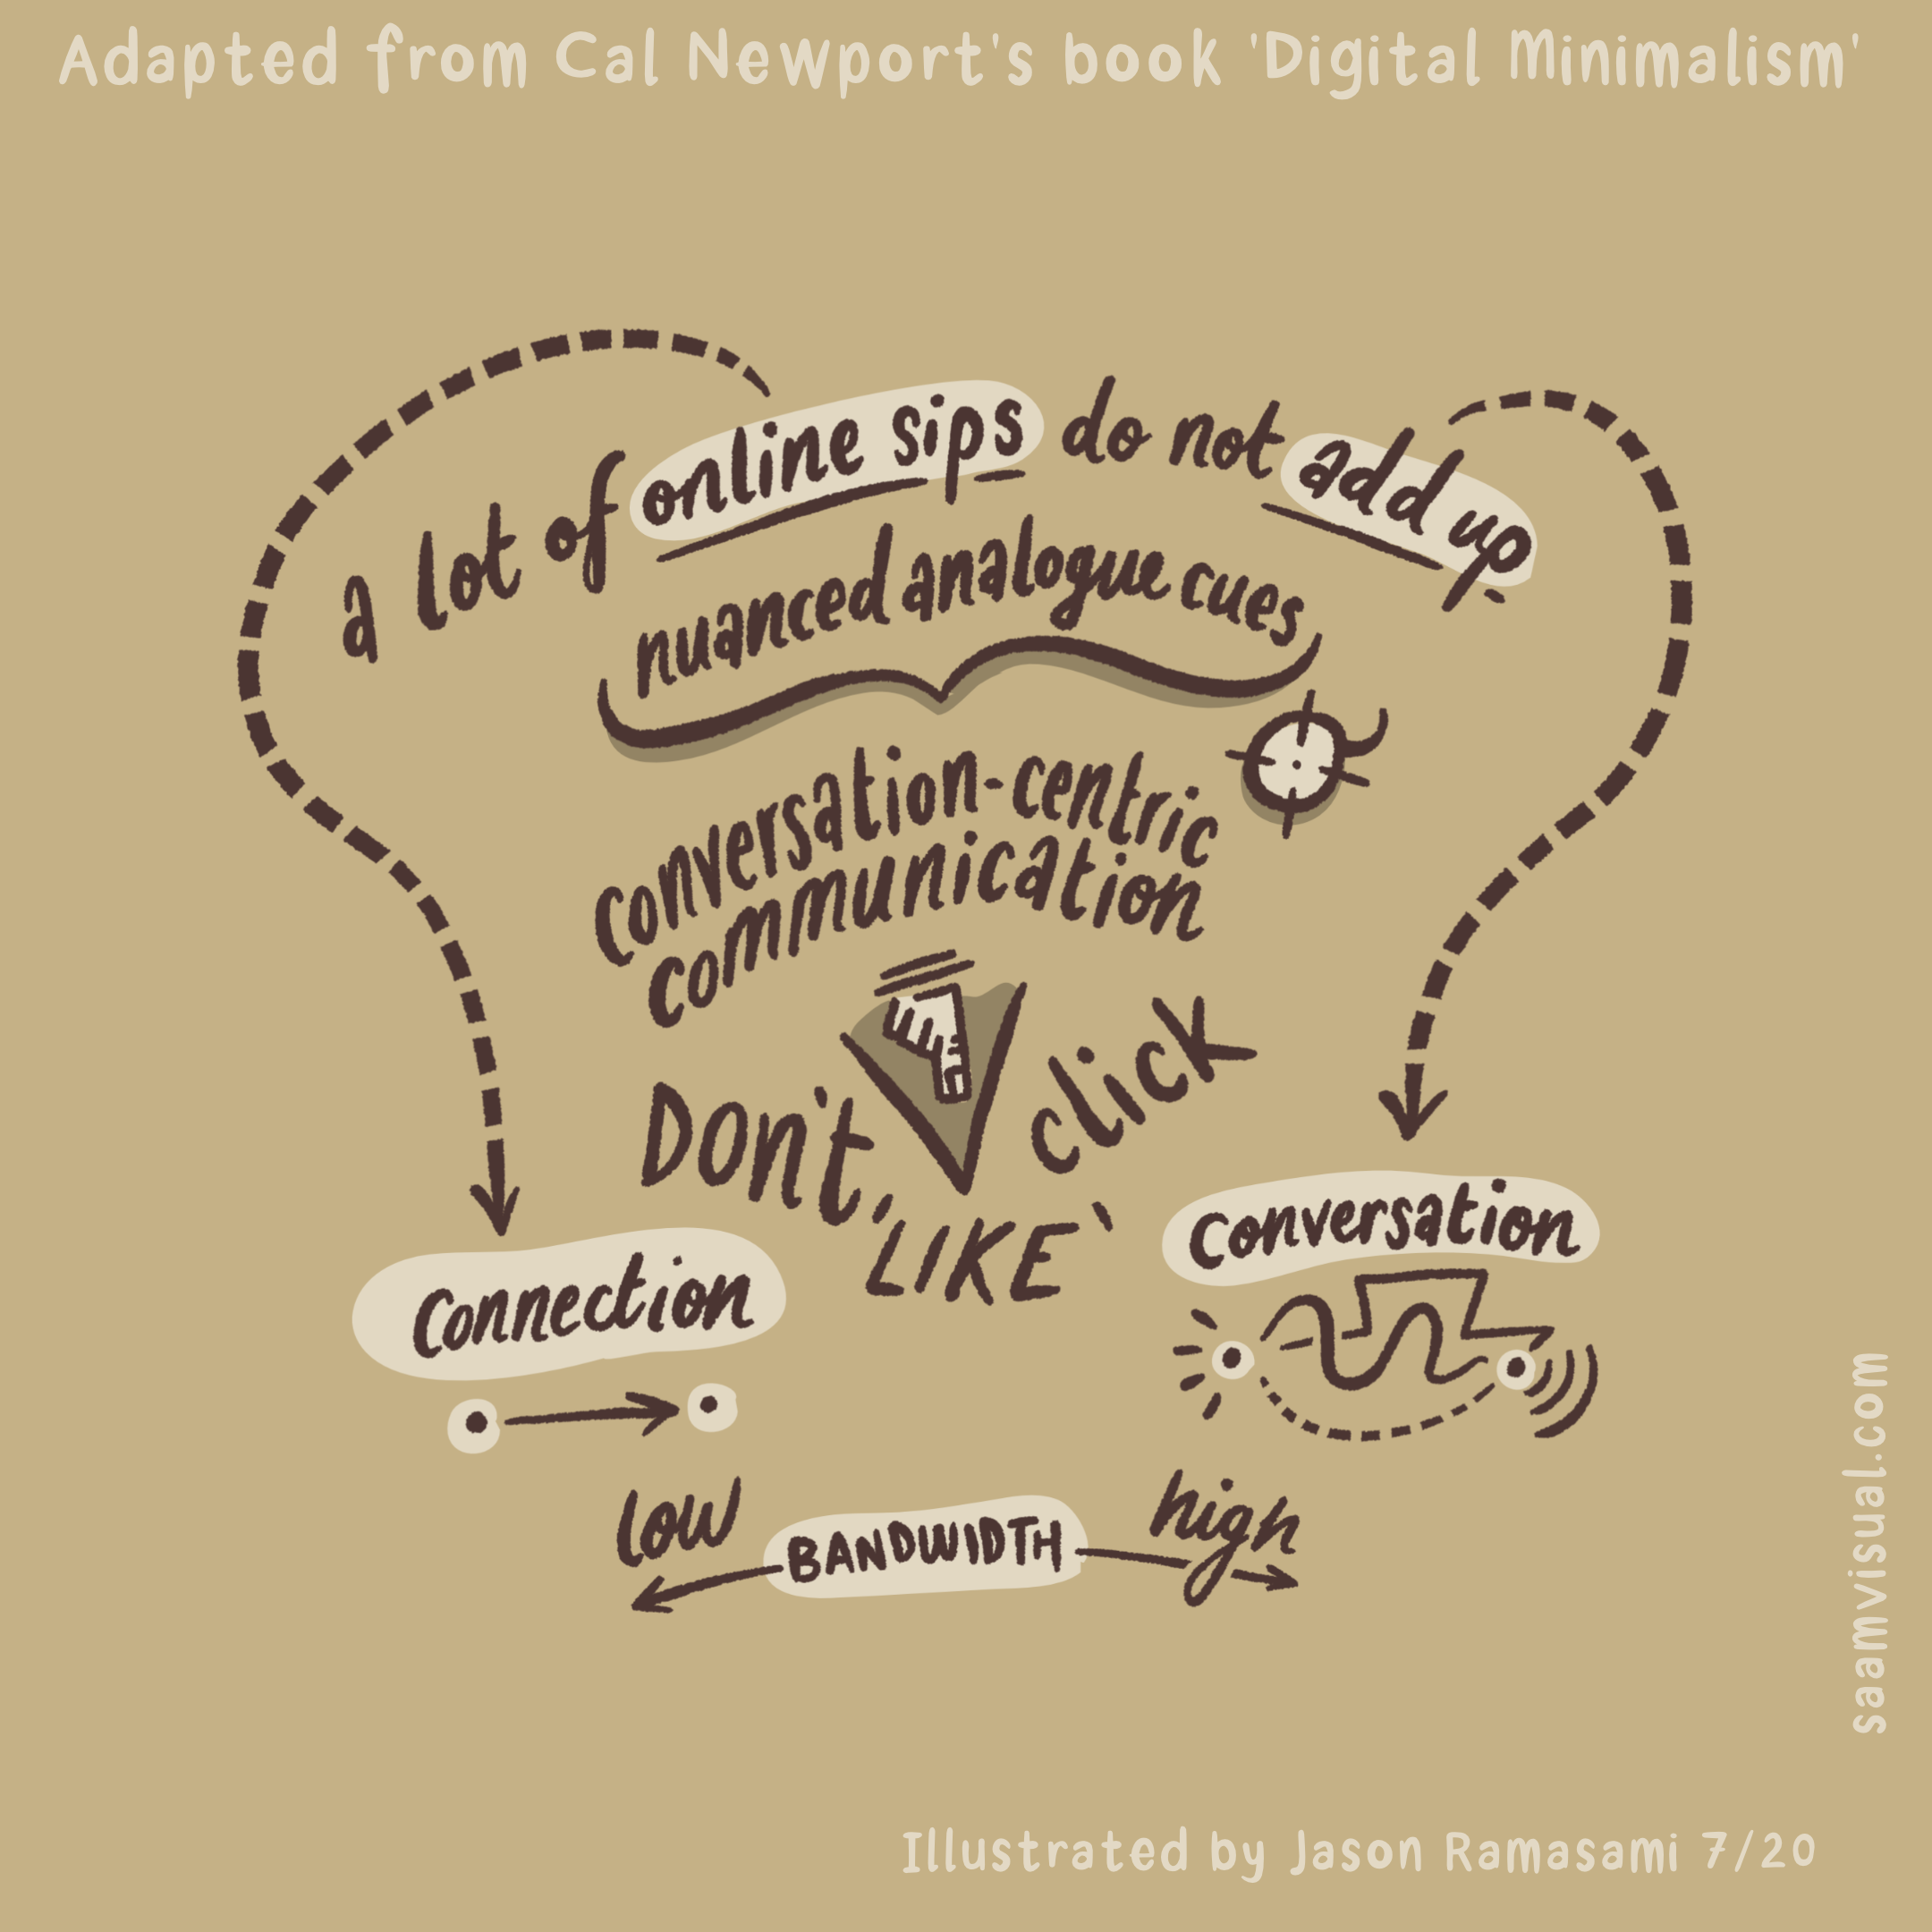 don’t allow online connection to become a poor substitute for the richness of high-bandwidth conversation!